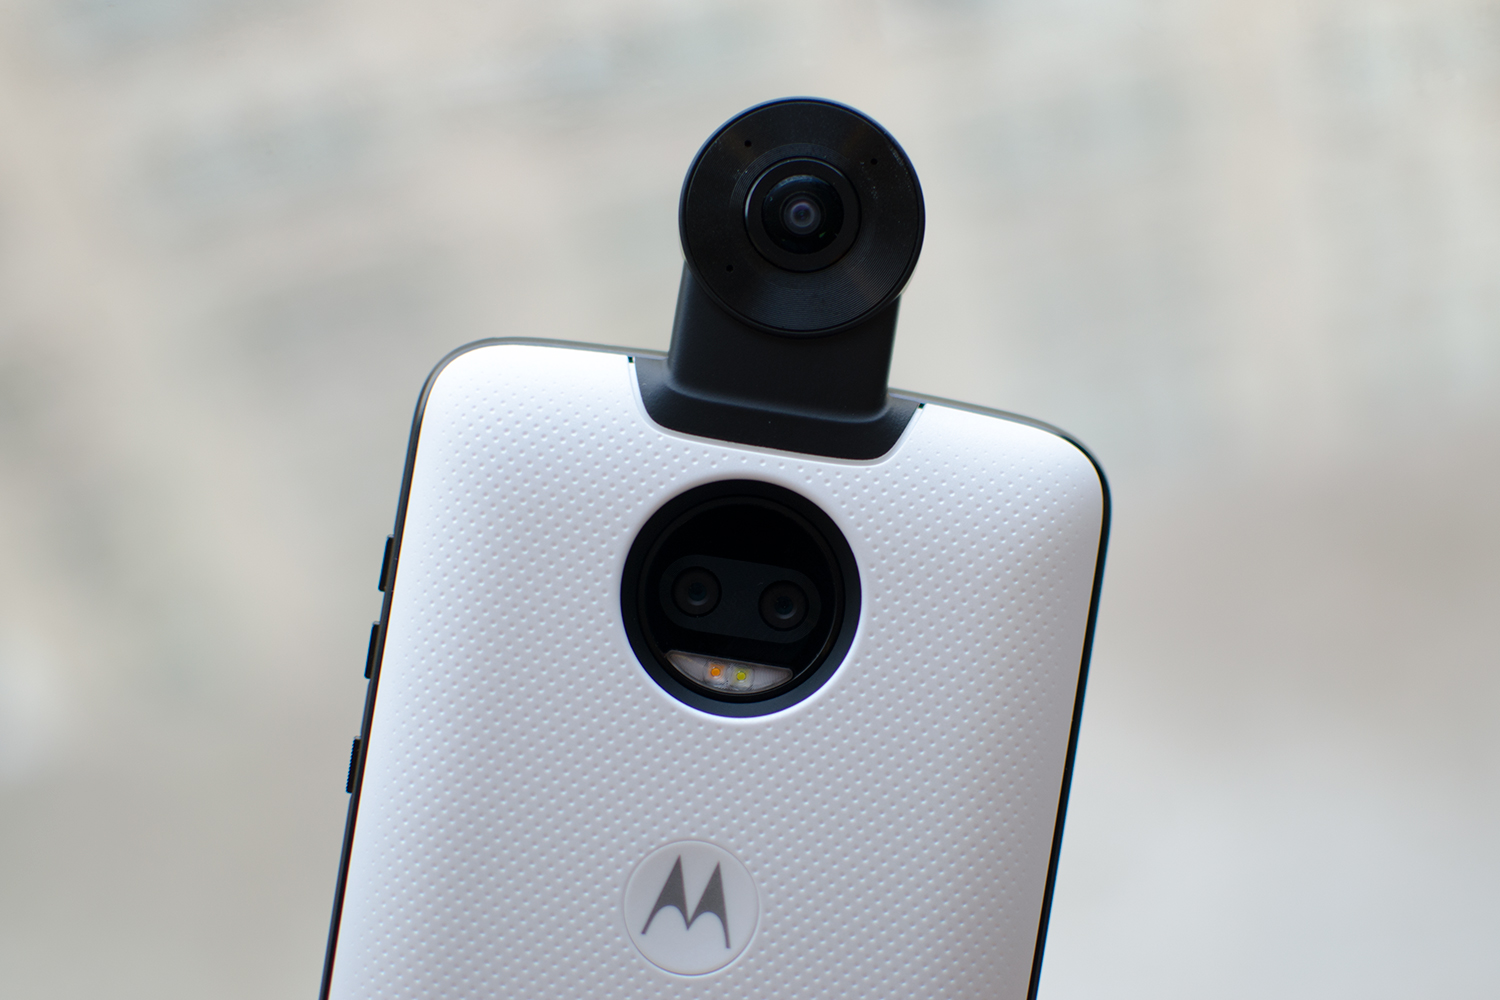 Moto 360 Camera Mod is like a third eye for your phone - CNET